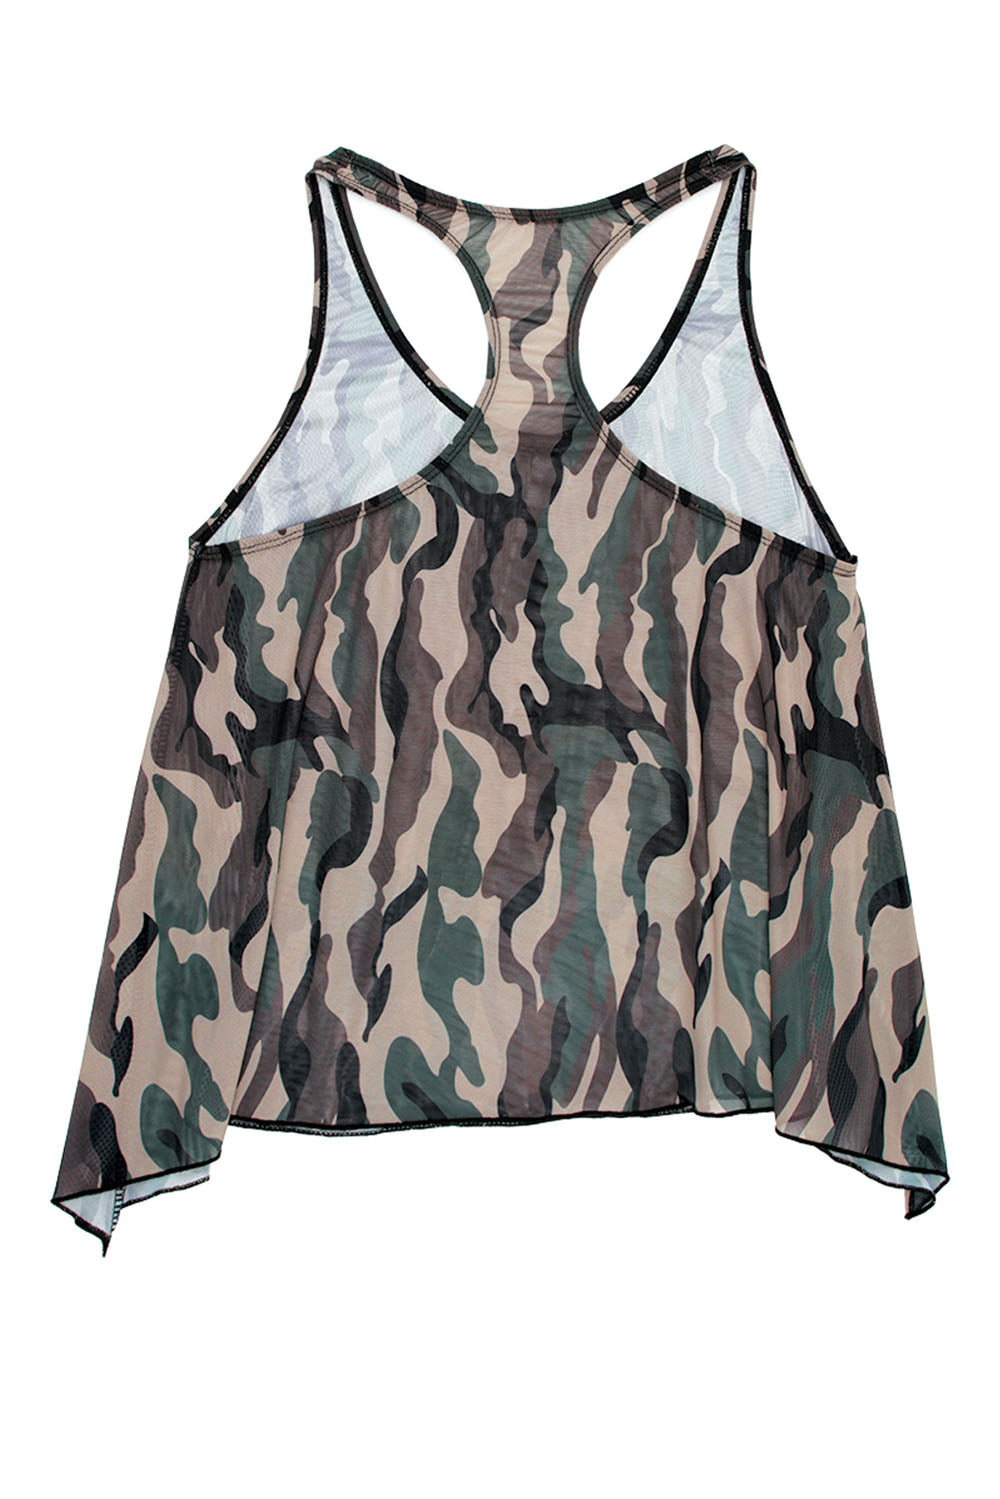 Savage Af Swing Top - Forest Camo -